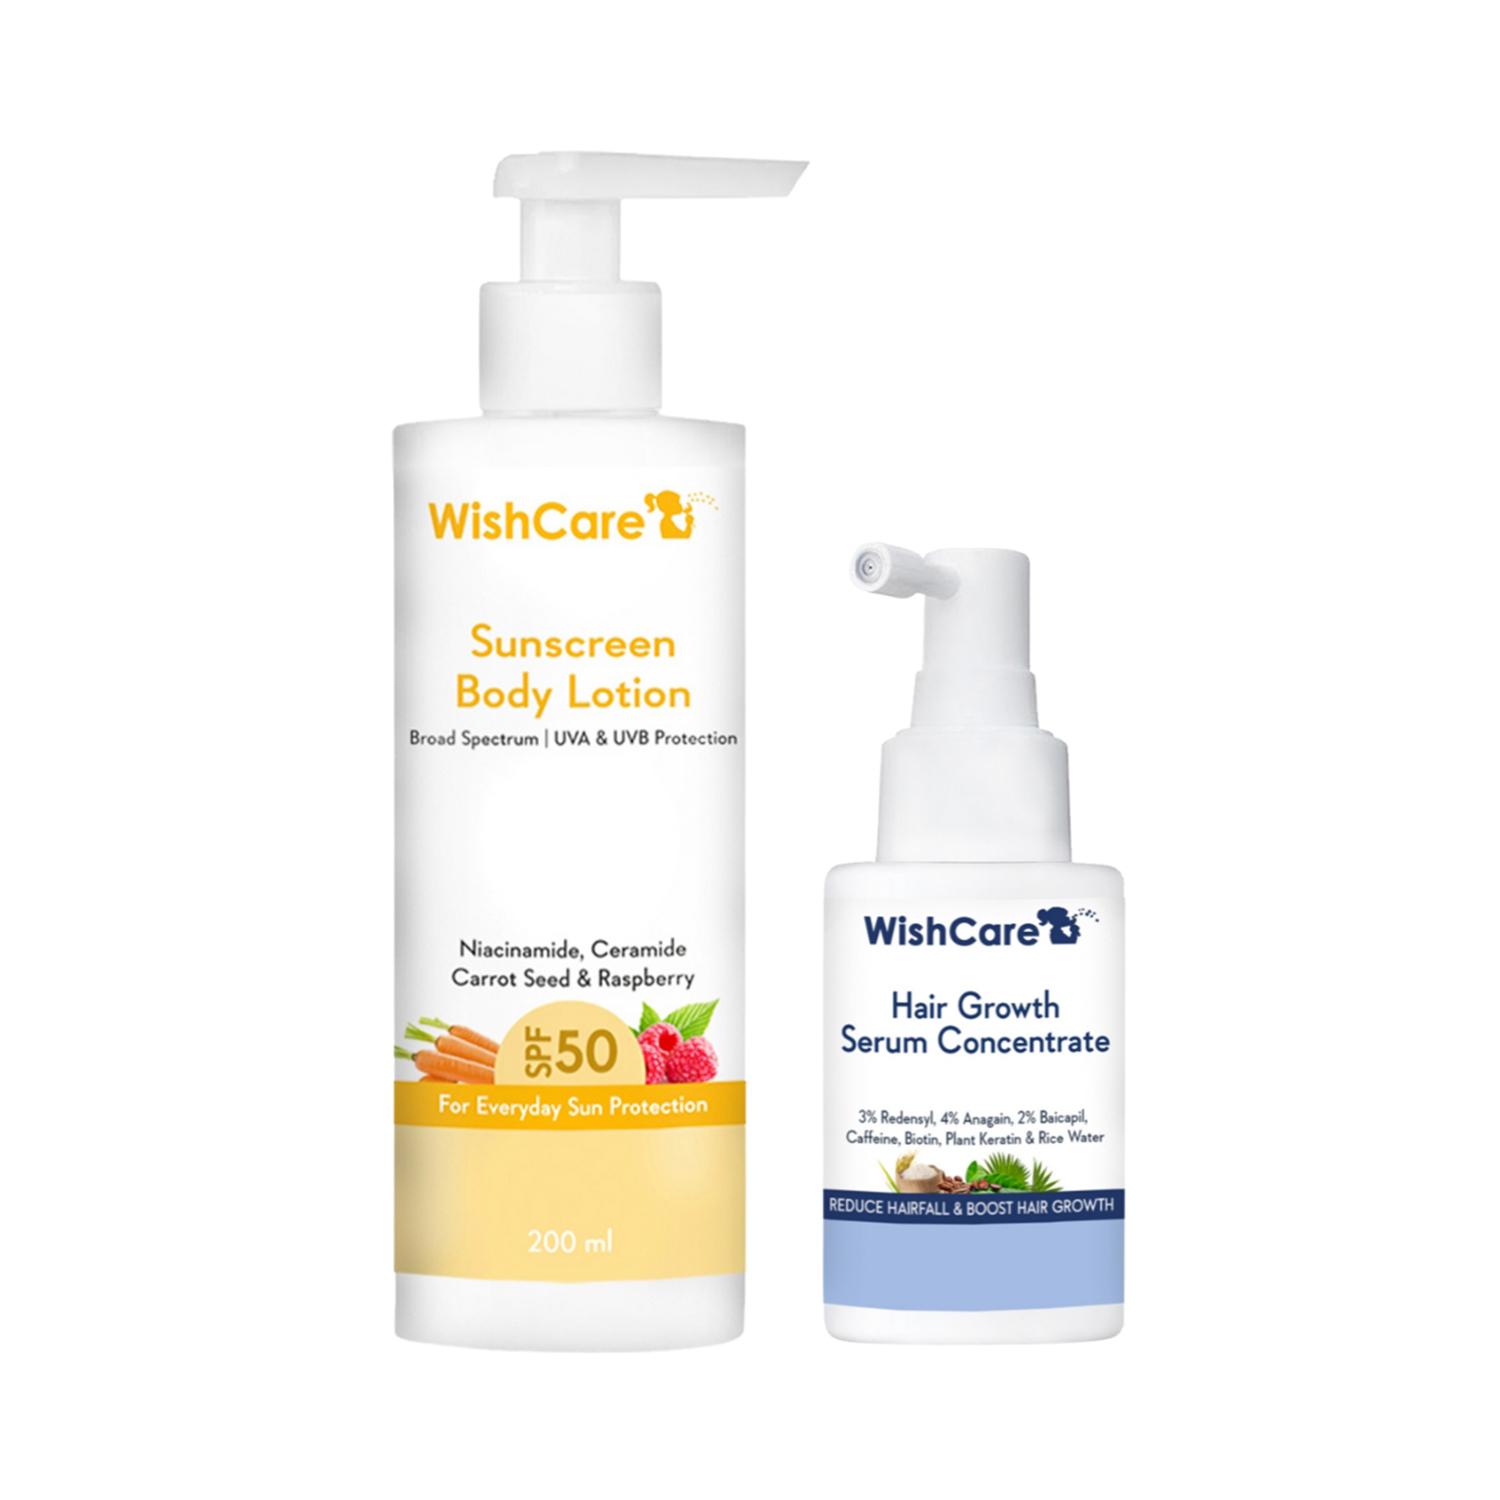 WishCare | WishCare Hair Growth Serum Concentrate (30 ml) & SPF 50 Sunscreen Body Lotion (200 ml) Combo